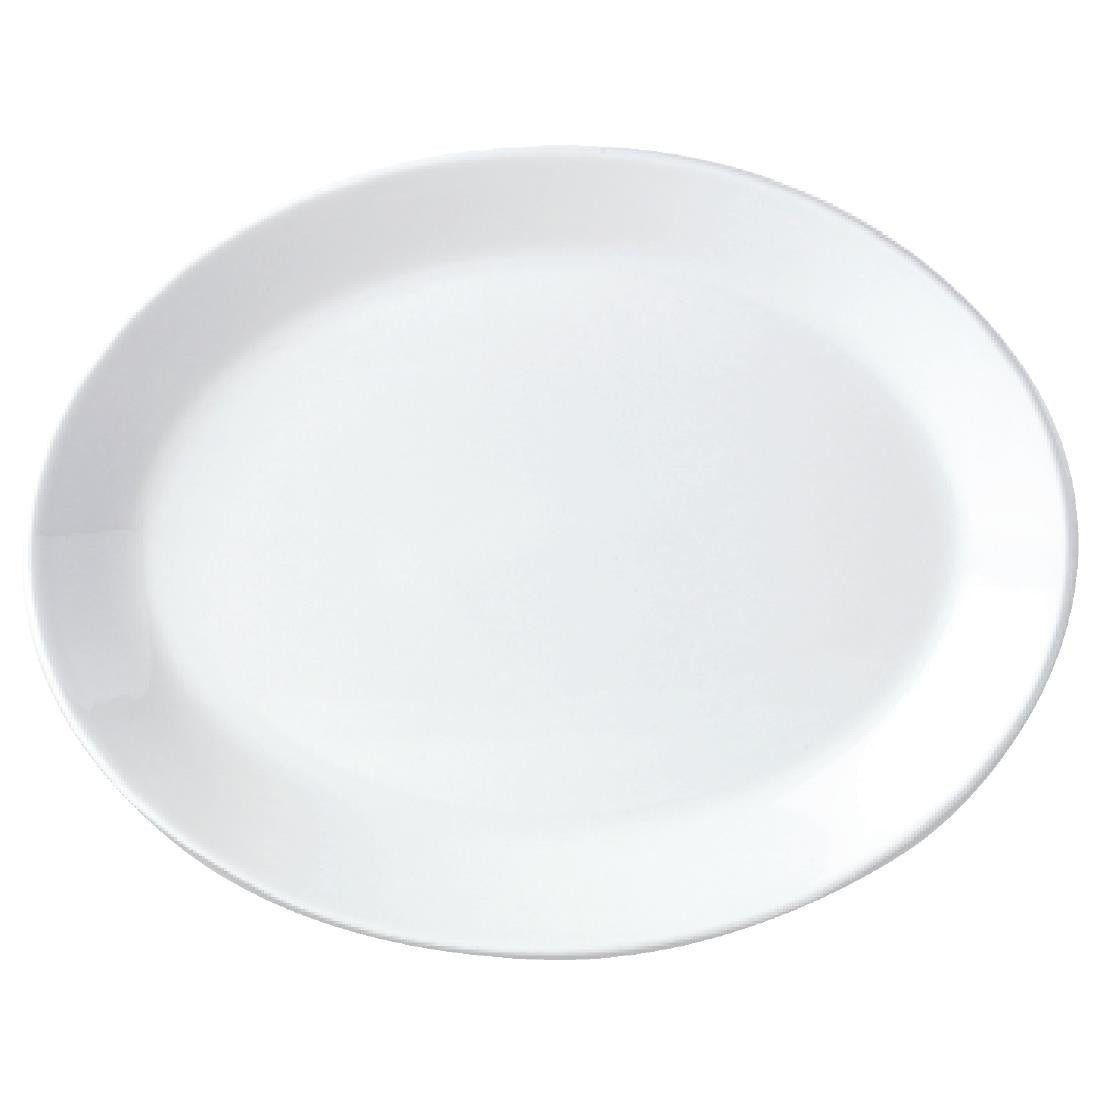 Steelite Simplicity White Oval Coupe Dishes 202mm (Pack of 24)